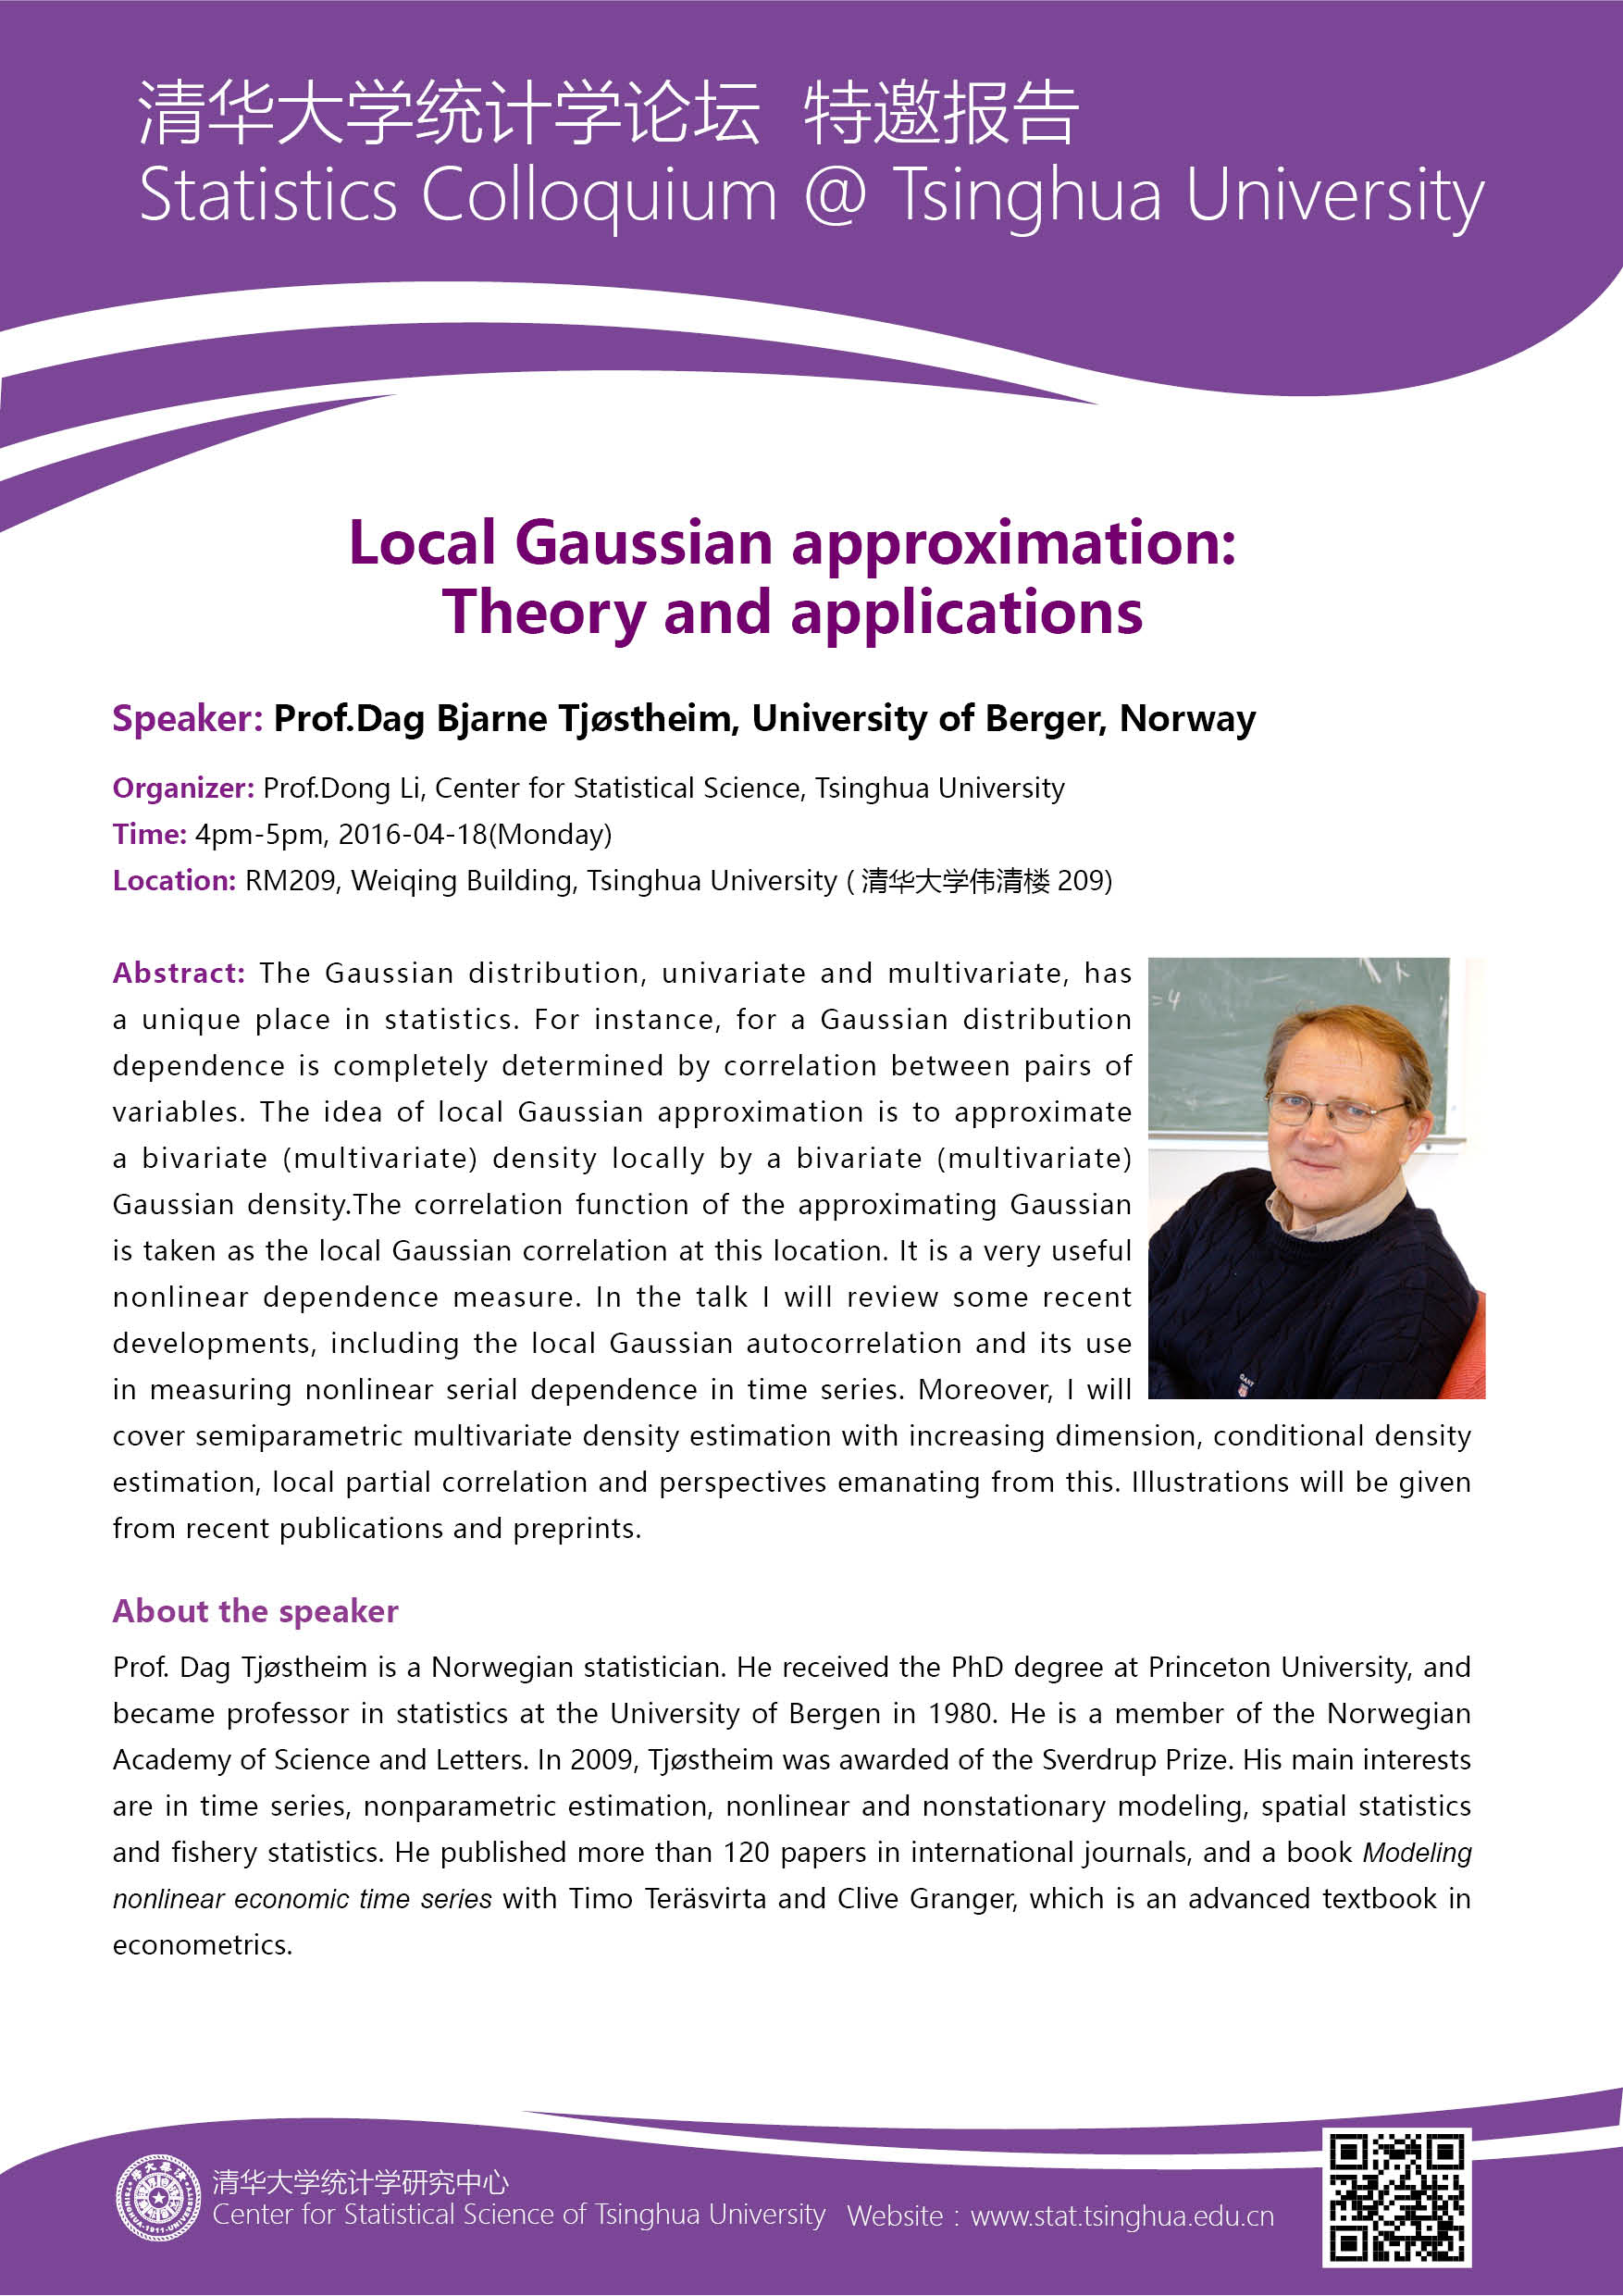 Local Gaussian Approximation: Theory and Applications